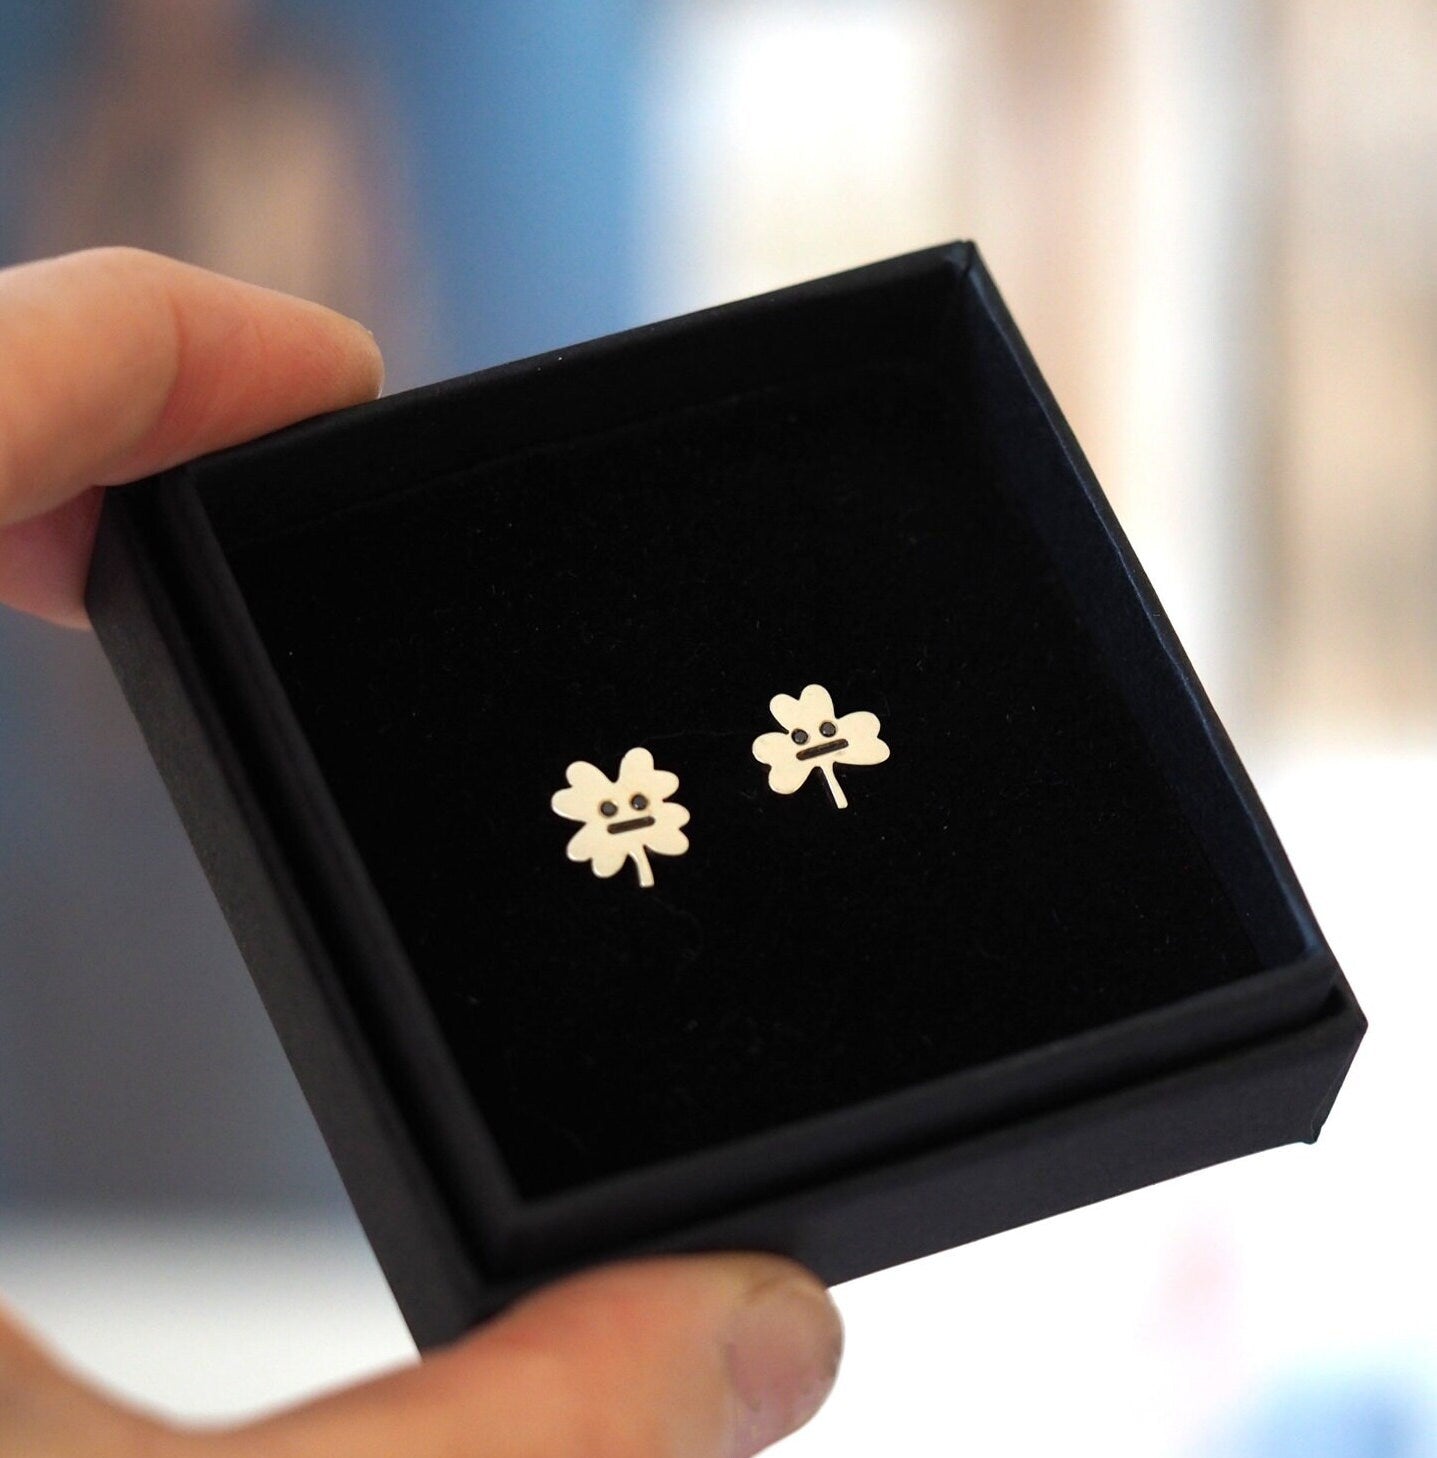 Clover Leaf Earrings - Recycled Sterling Silver and Black Diamonds